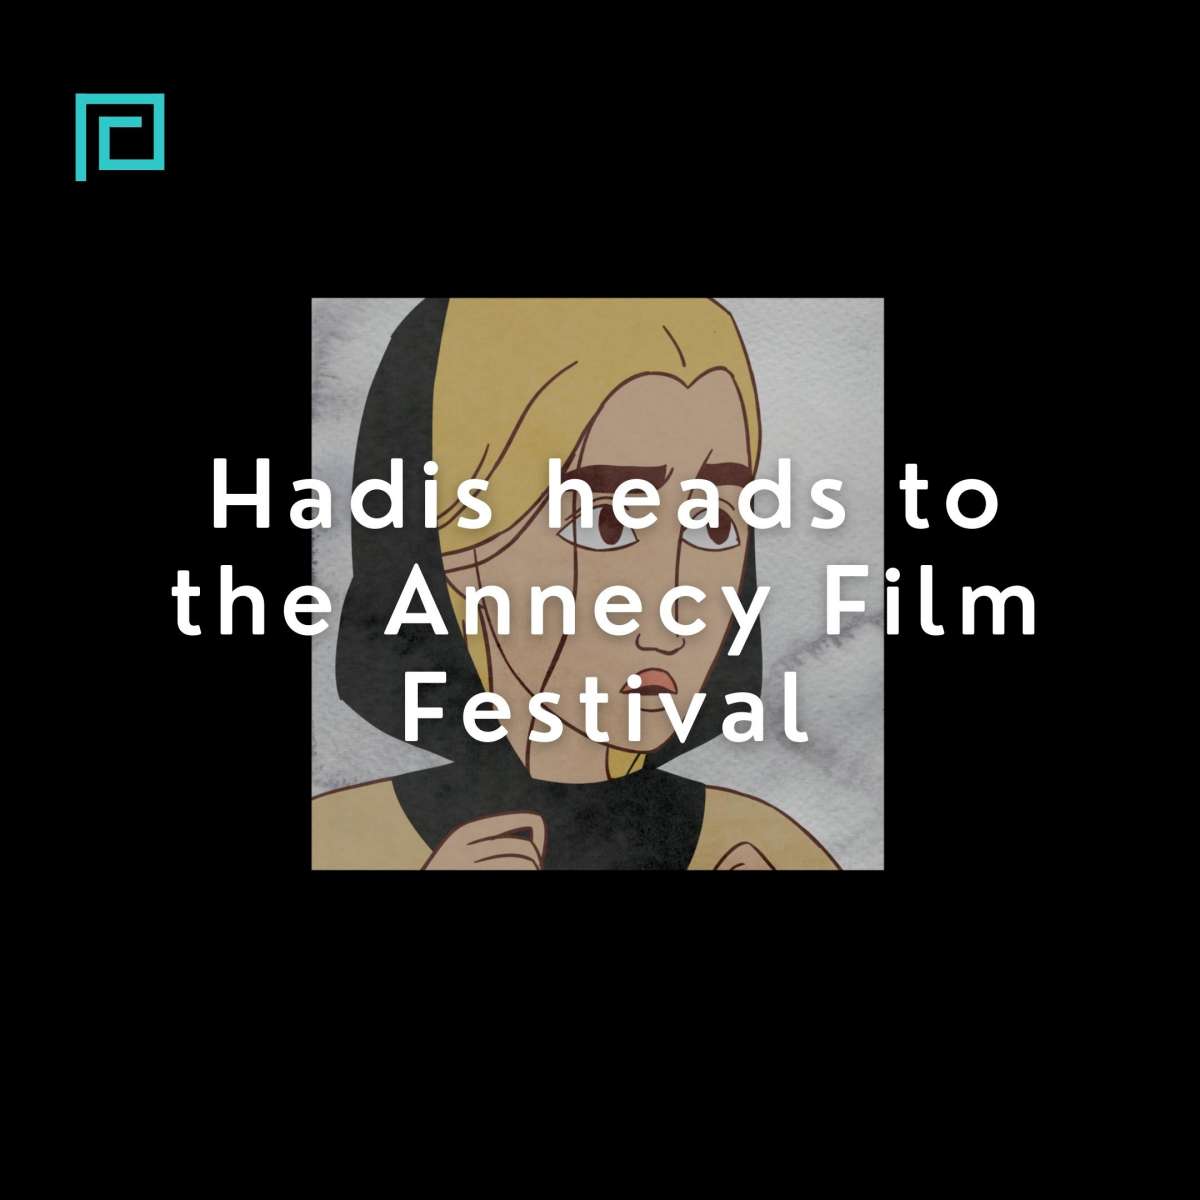 Hadis heads to the Annecy Film Festival